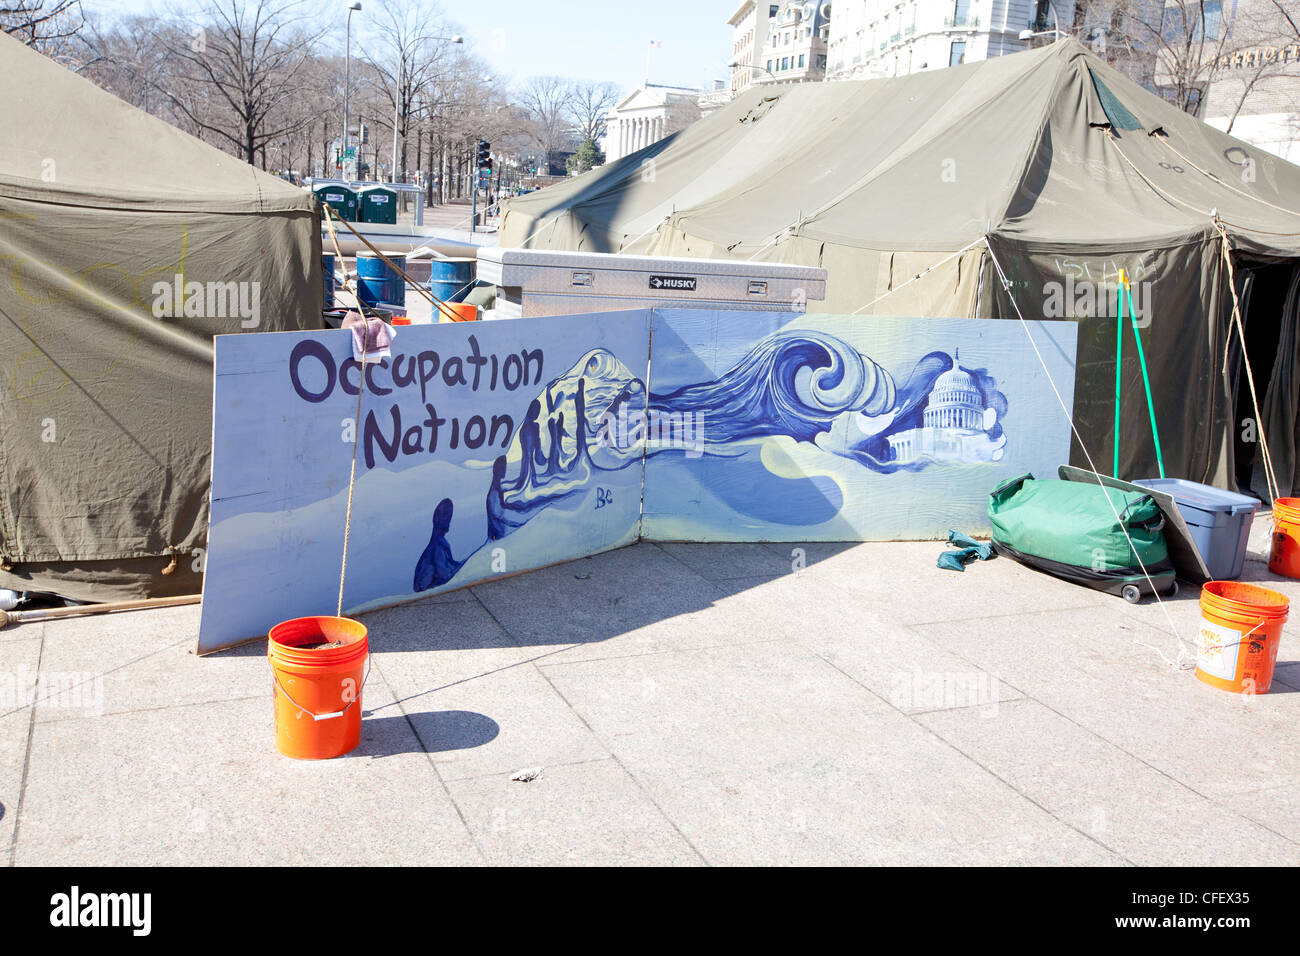 WASHINGTON DC FEBRUARY 18 2012 - Occupy protesters camp near the capital of the United States Stock Photo